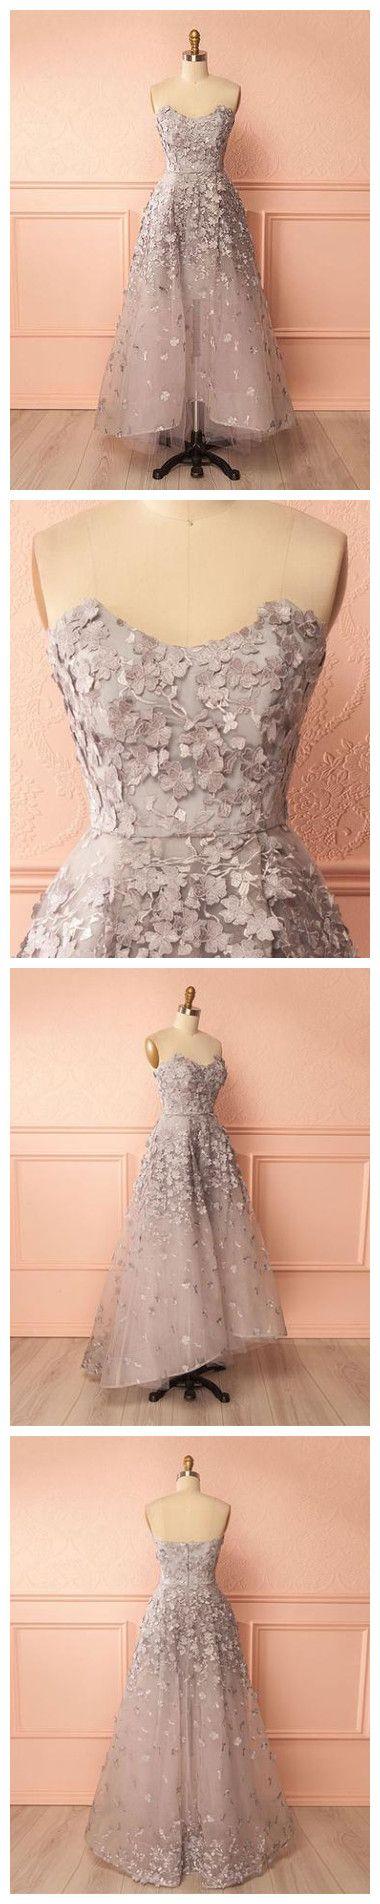 Wedding - A-line Sweetheart High Low Prom Dress Silver Applique Tulle Chic Evening Dress AM702